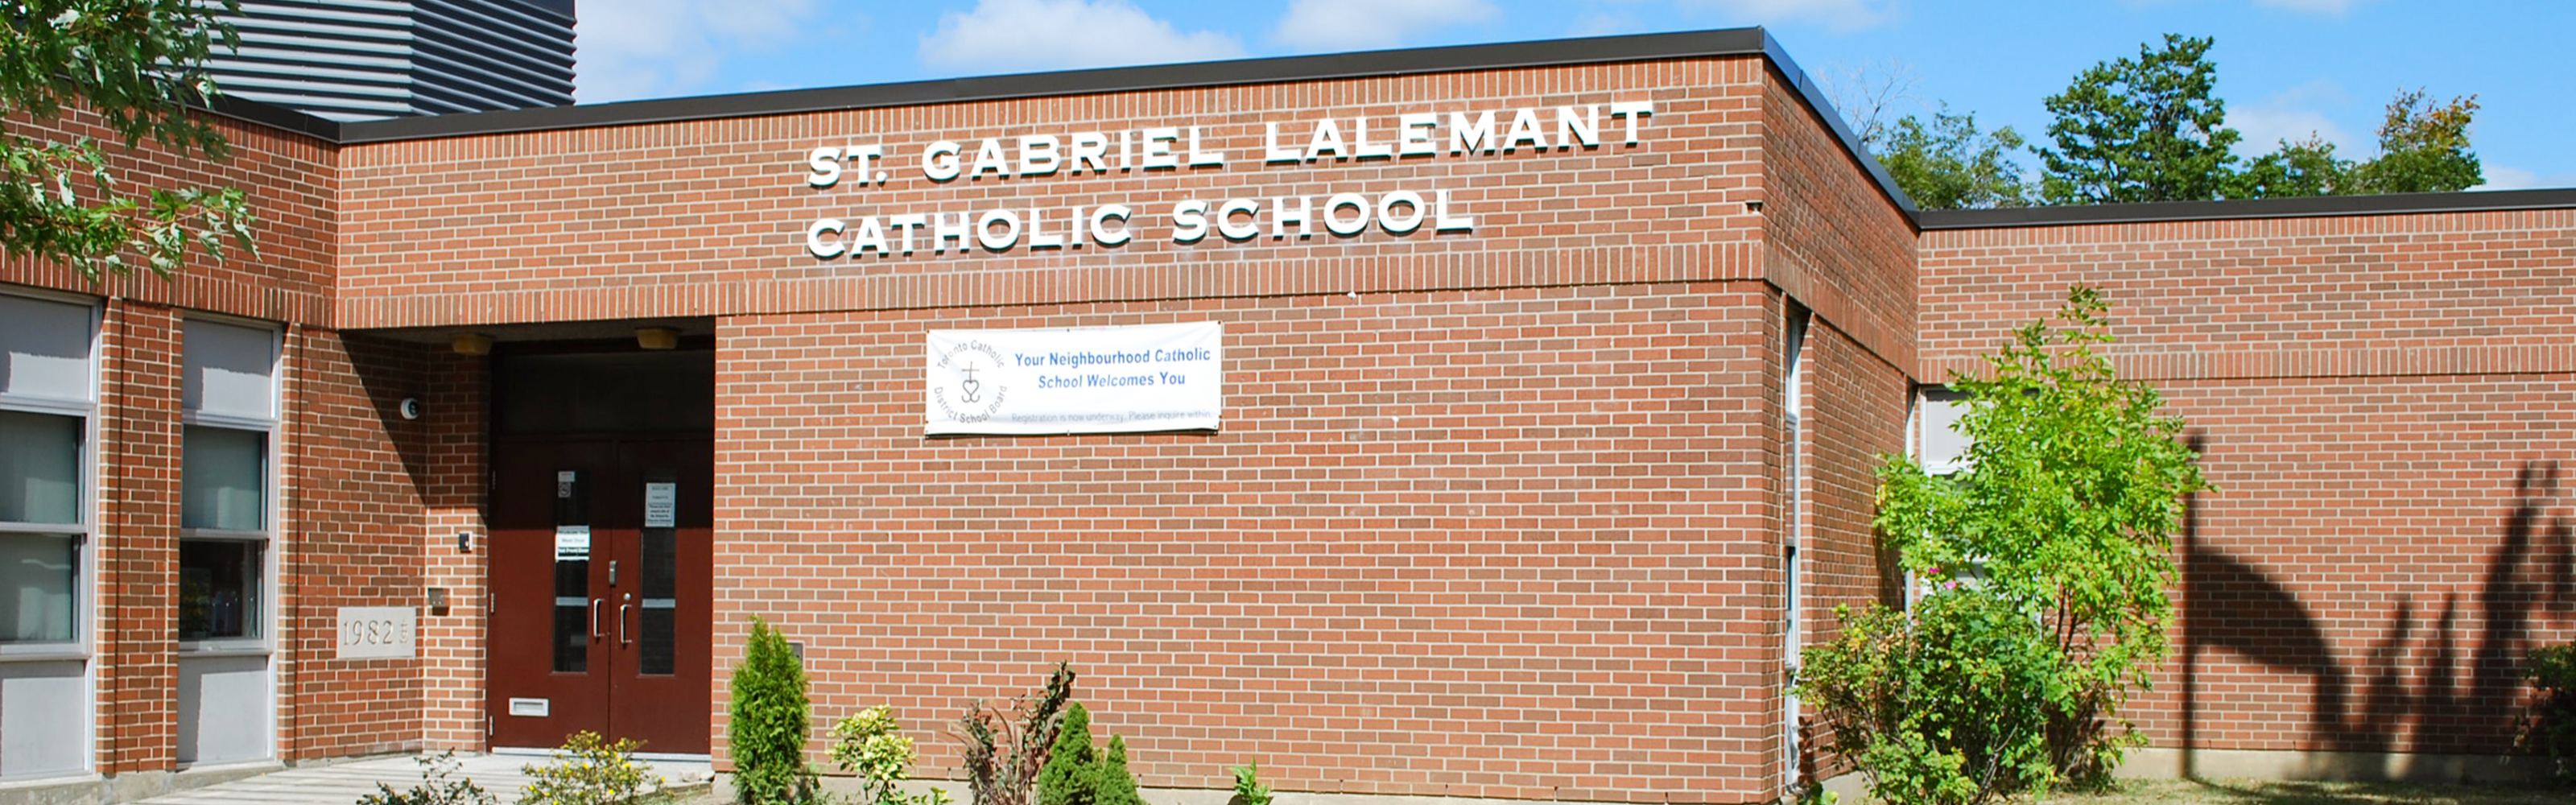 The front of the St. Gabriel Lalemant Catholic School building.